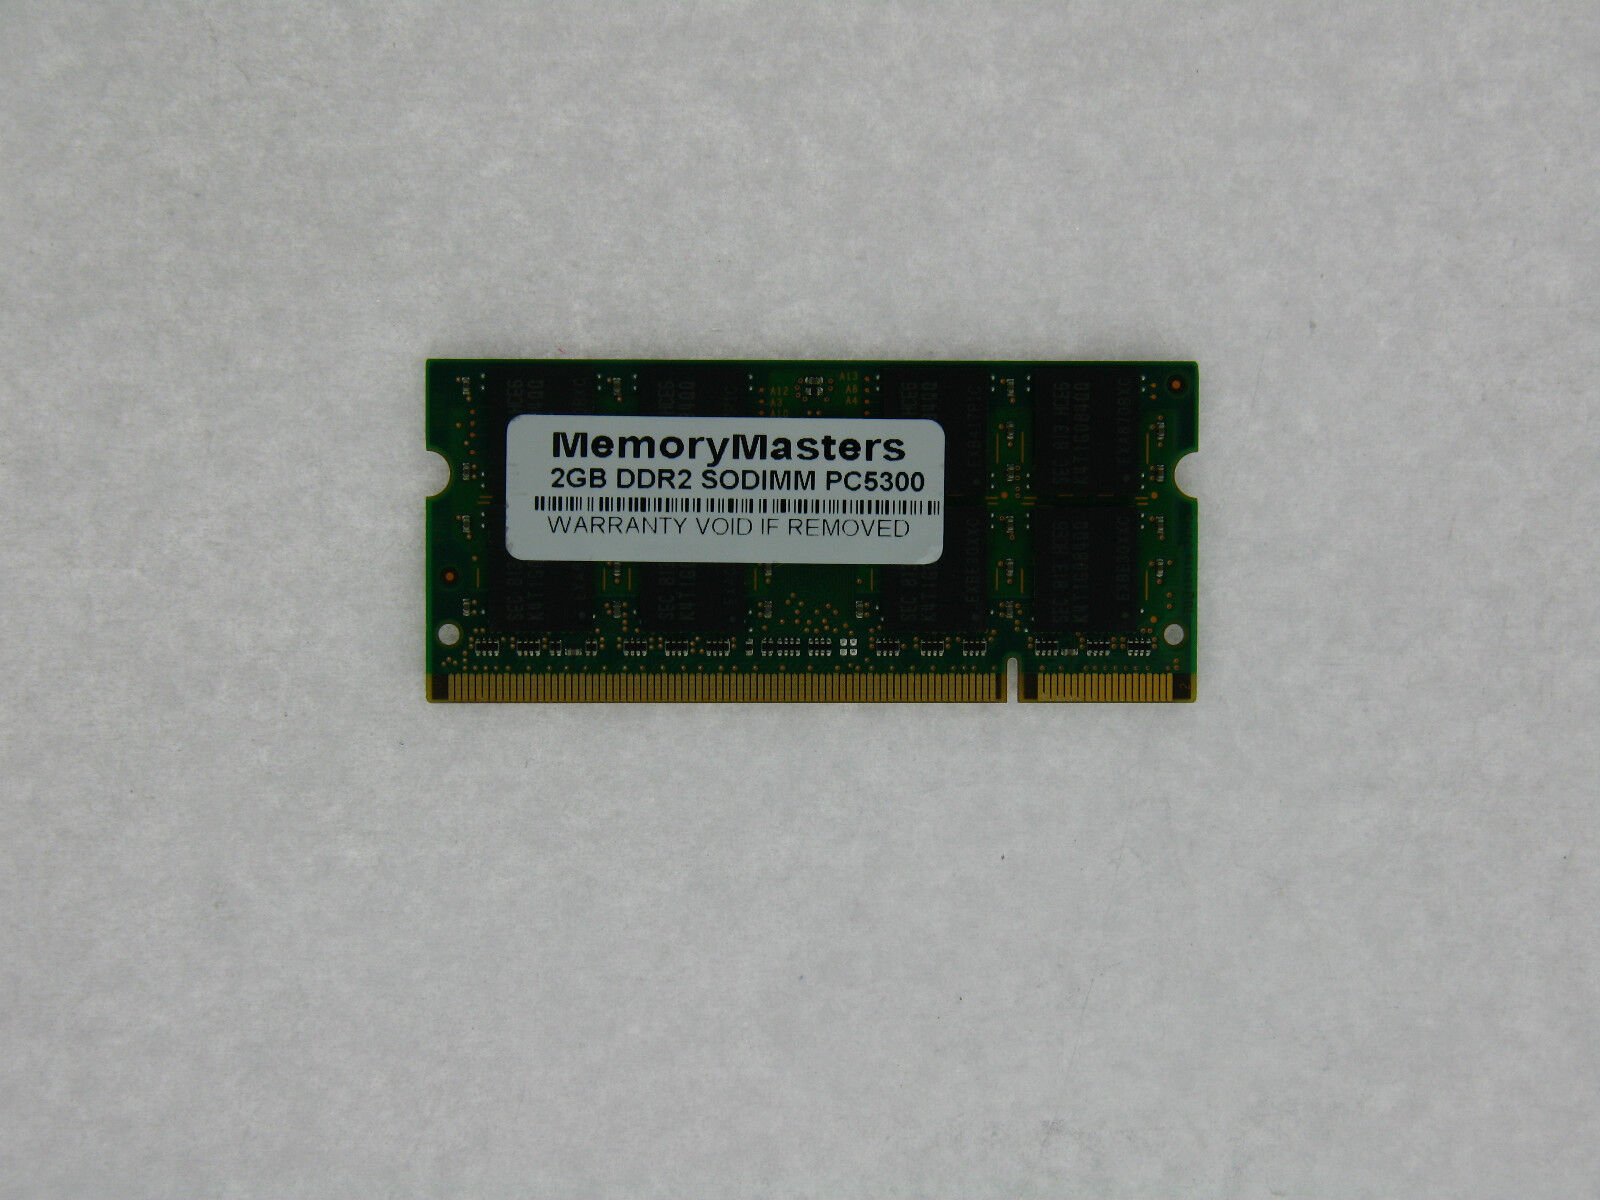 Primary image for 2GB Memory for Acer Aspire 5532 6C3G32MN 1x2GB New-
show original title

Orig...